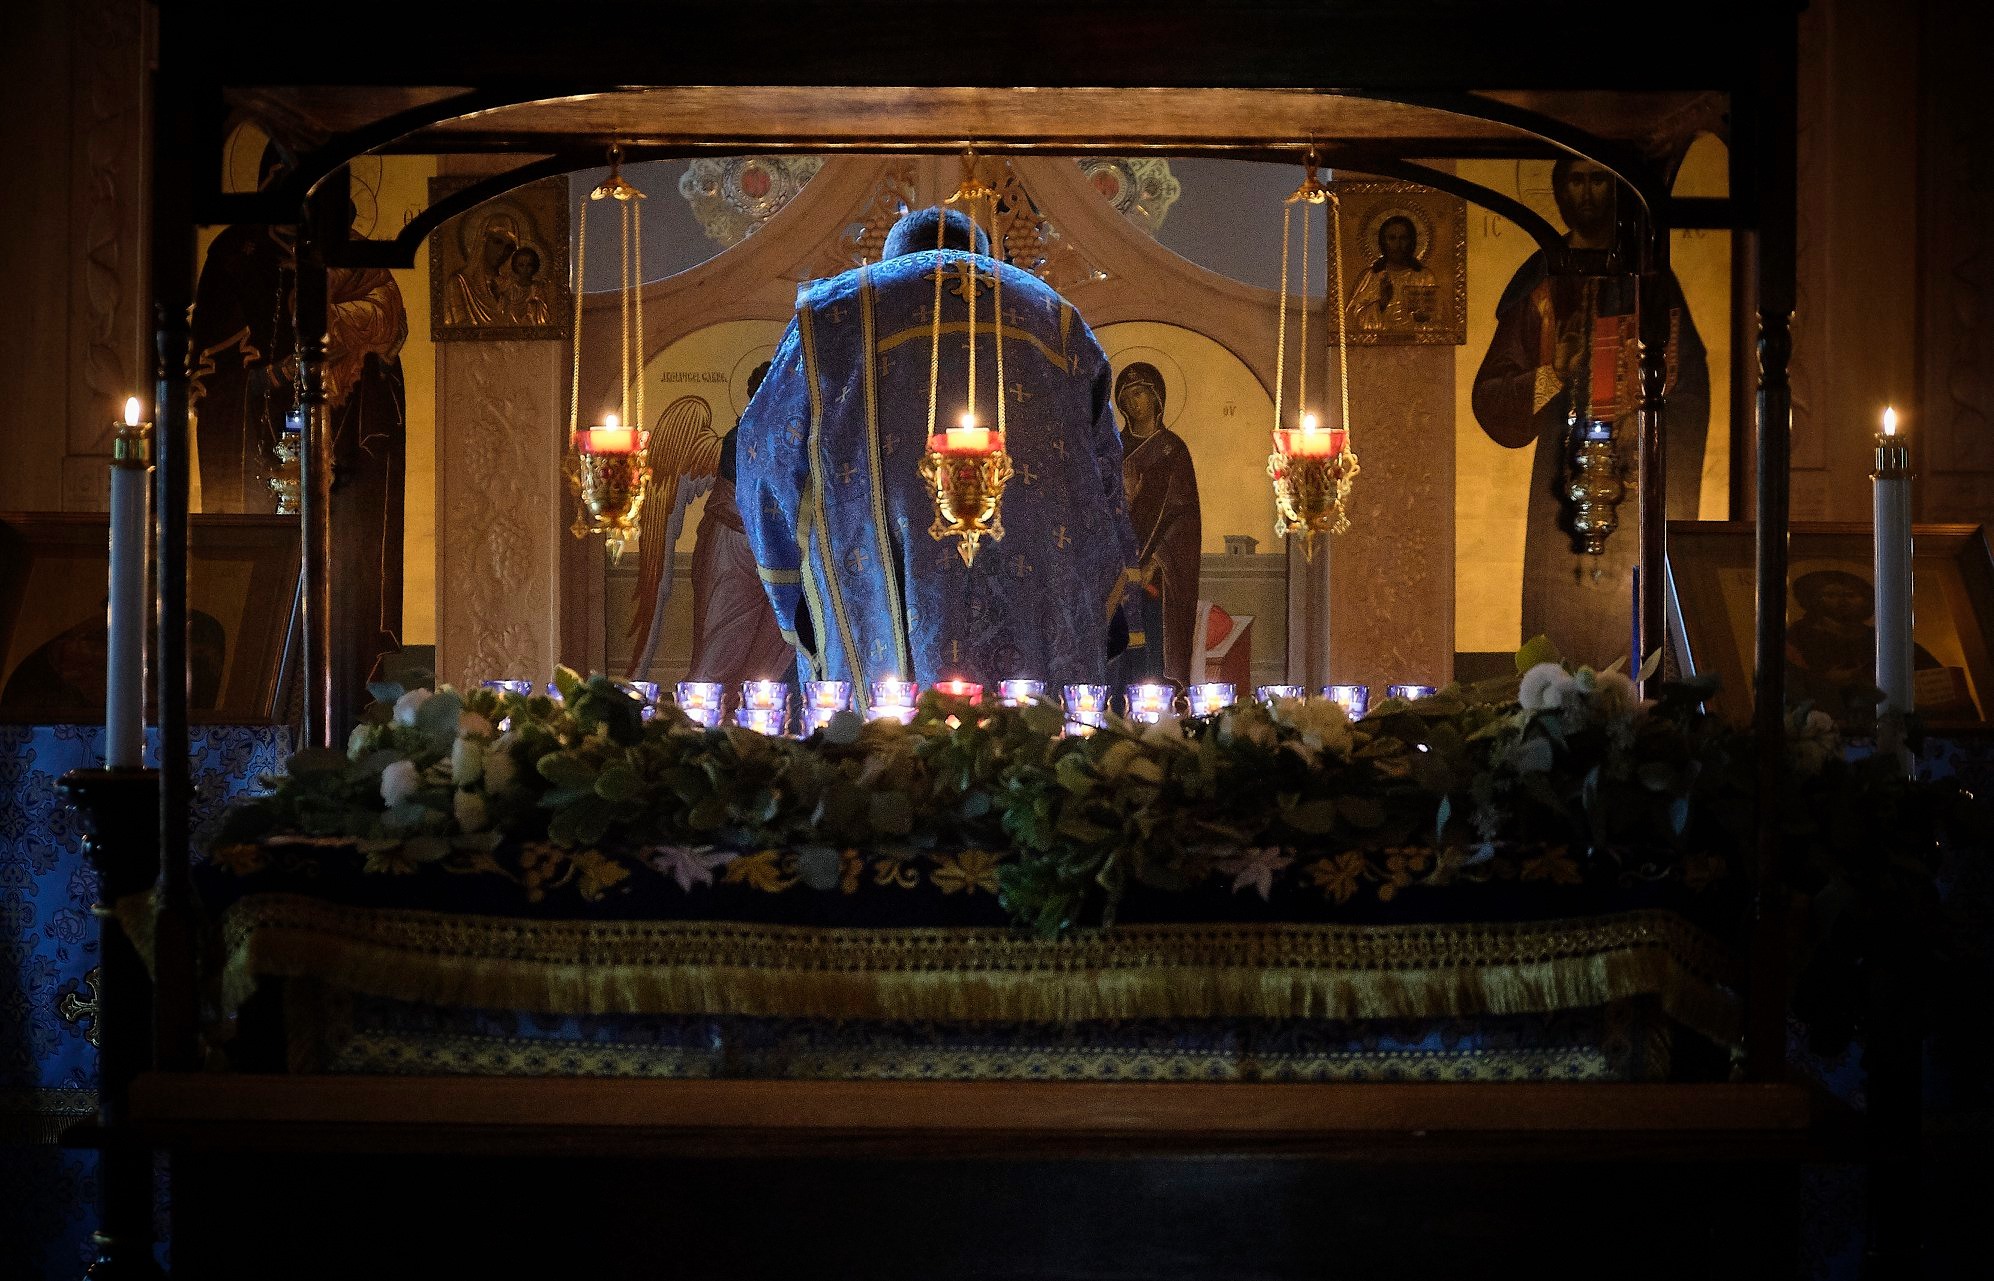  Looking through the ceremonial tomb that has lit candles and flowers inside. Deacon is shown from behind bowing in front of the altar.  